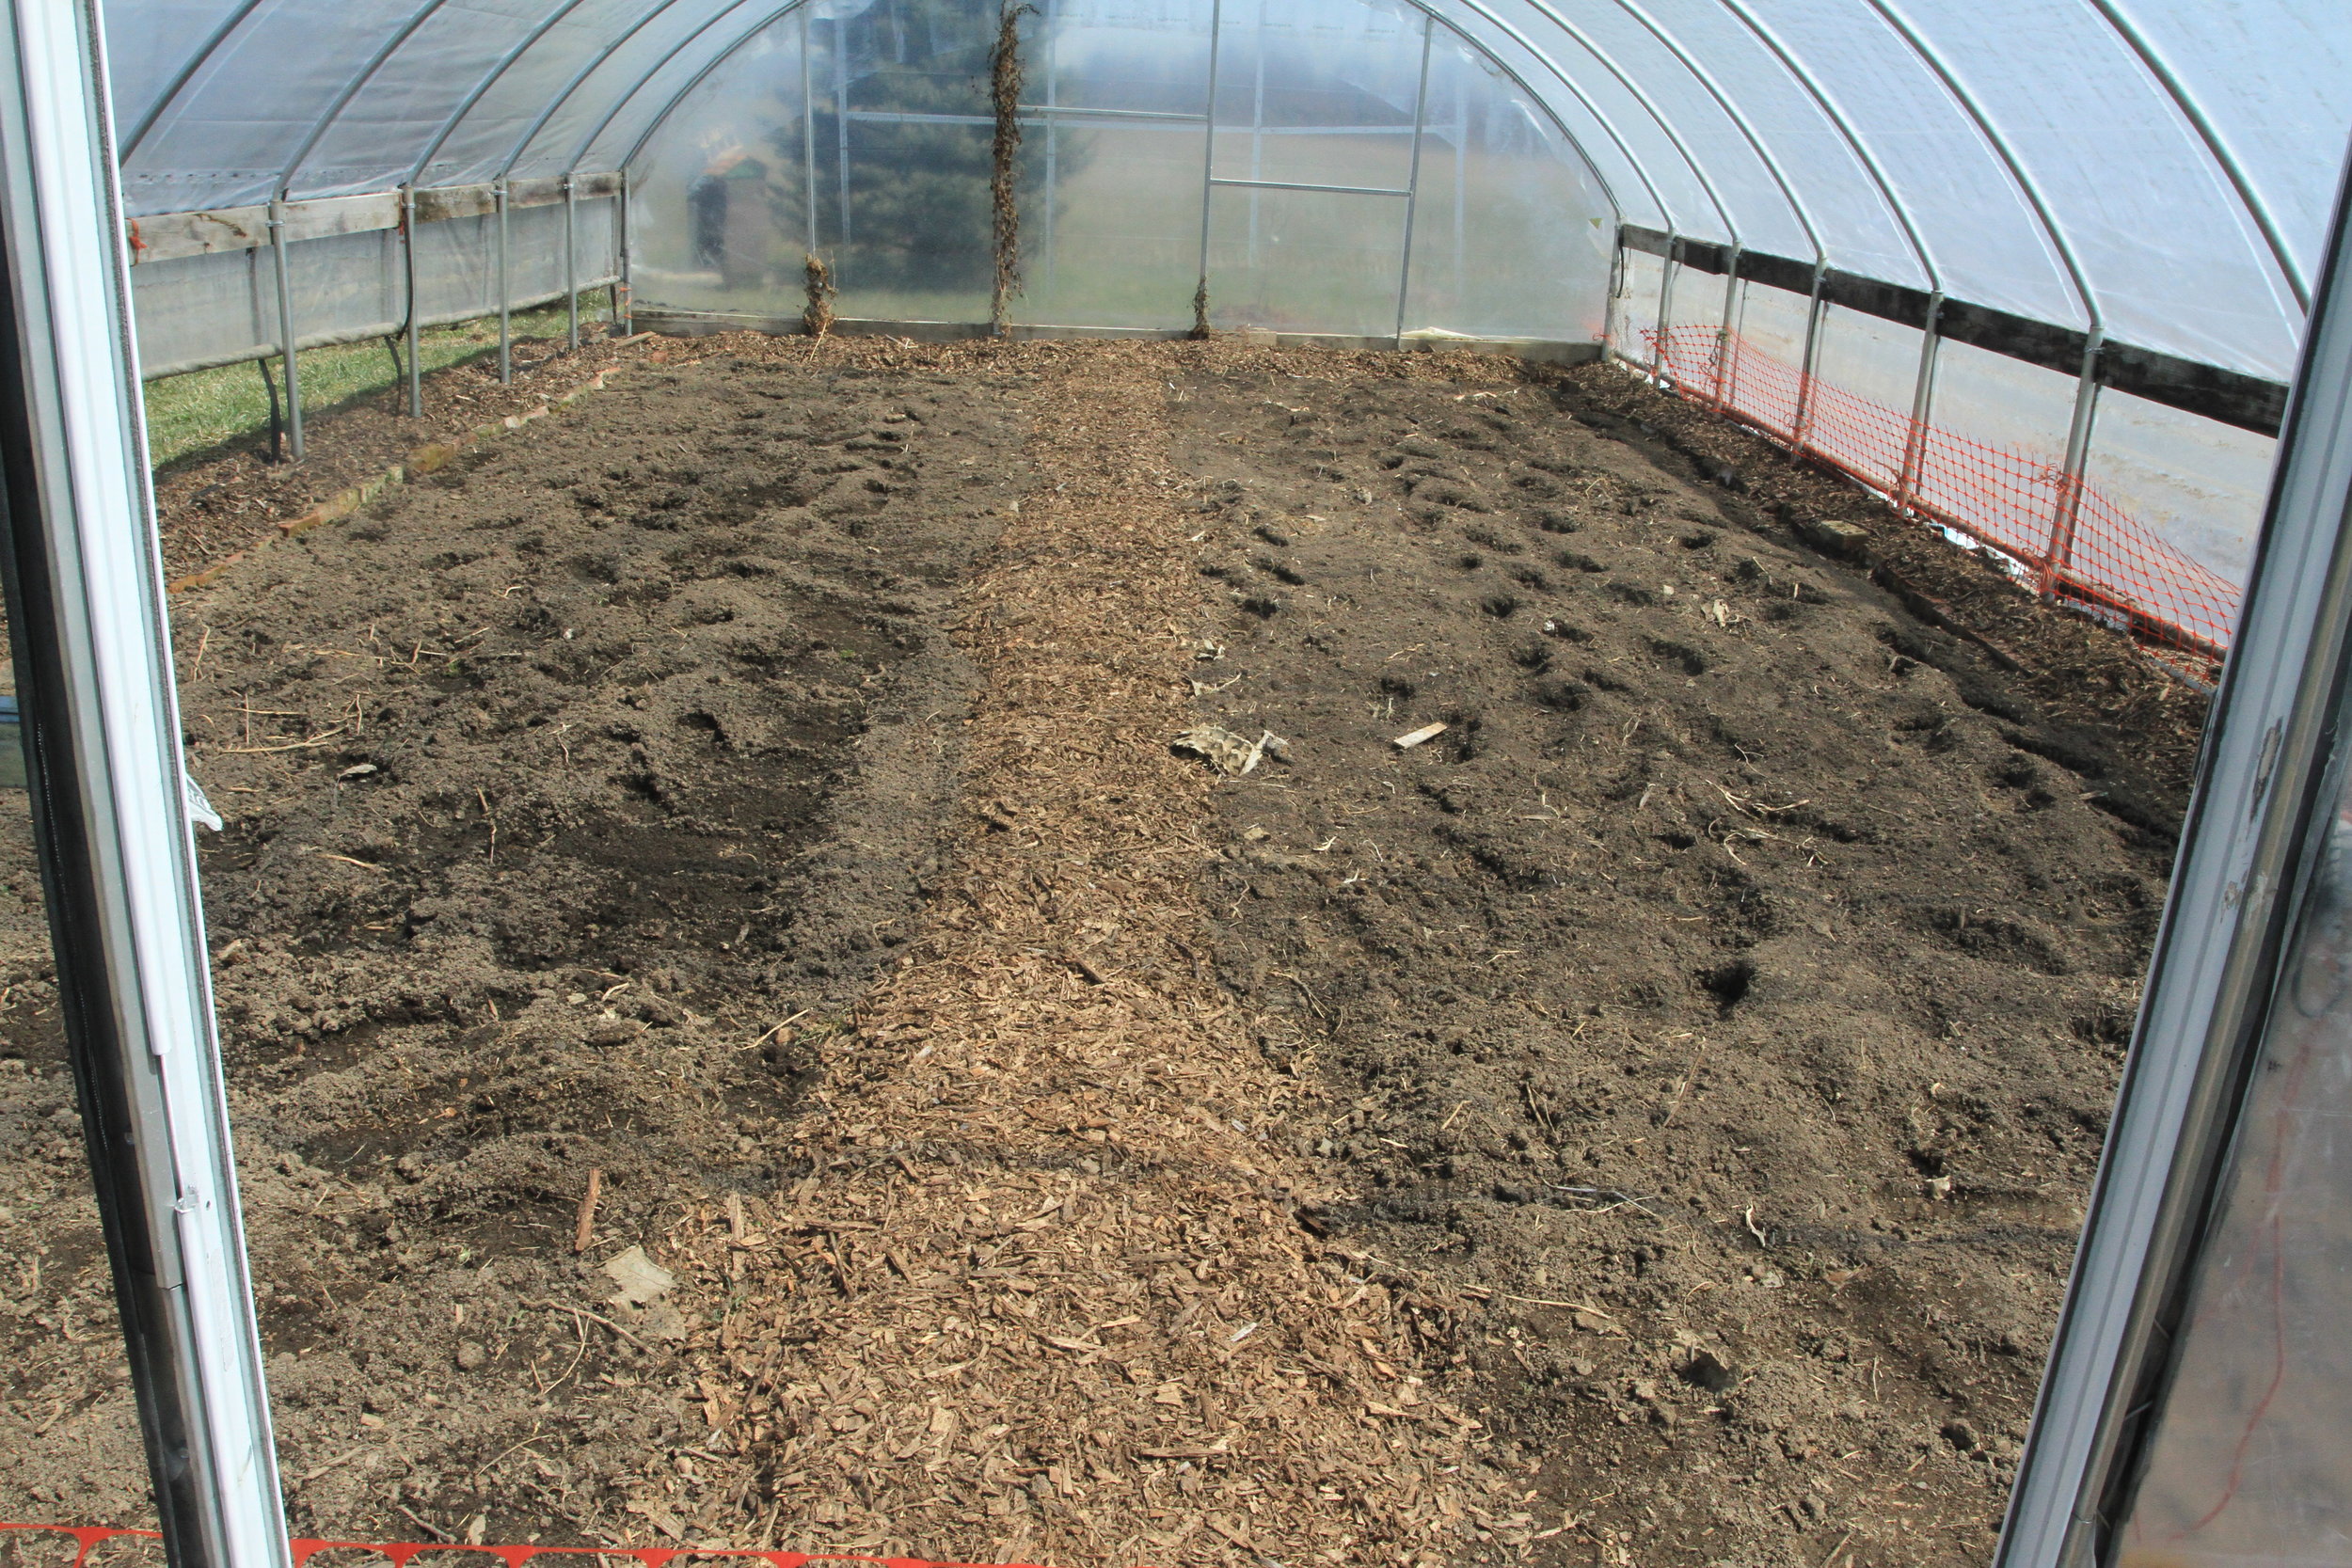  The little high tunnel ready for plants - cauliflower, broccoli and kale are in! 